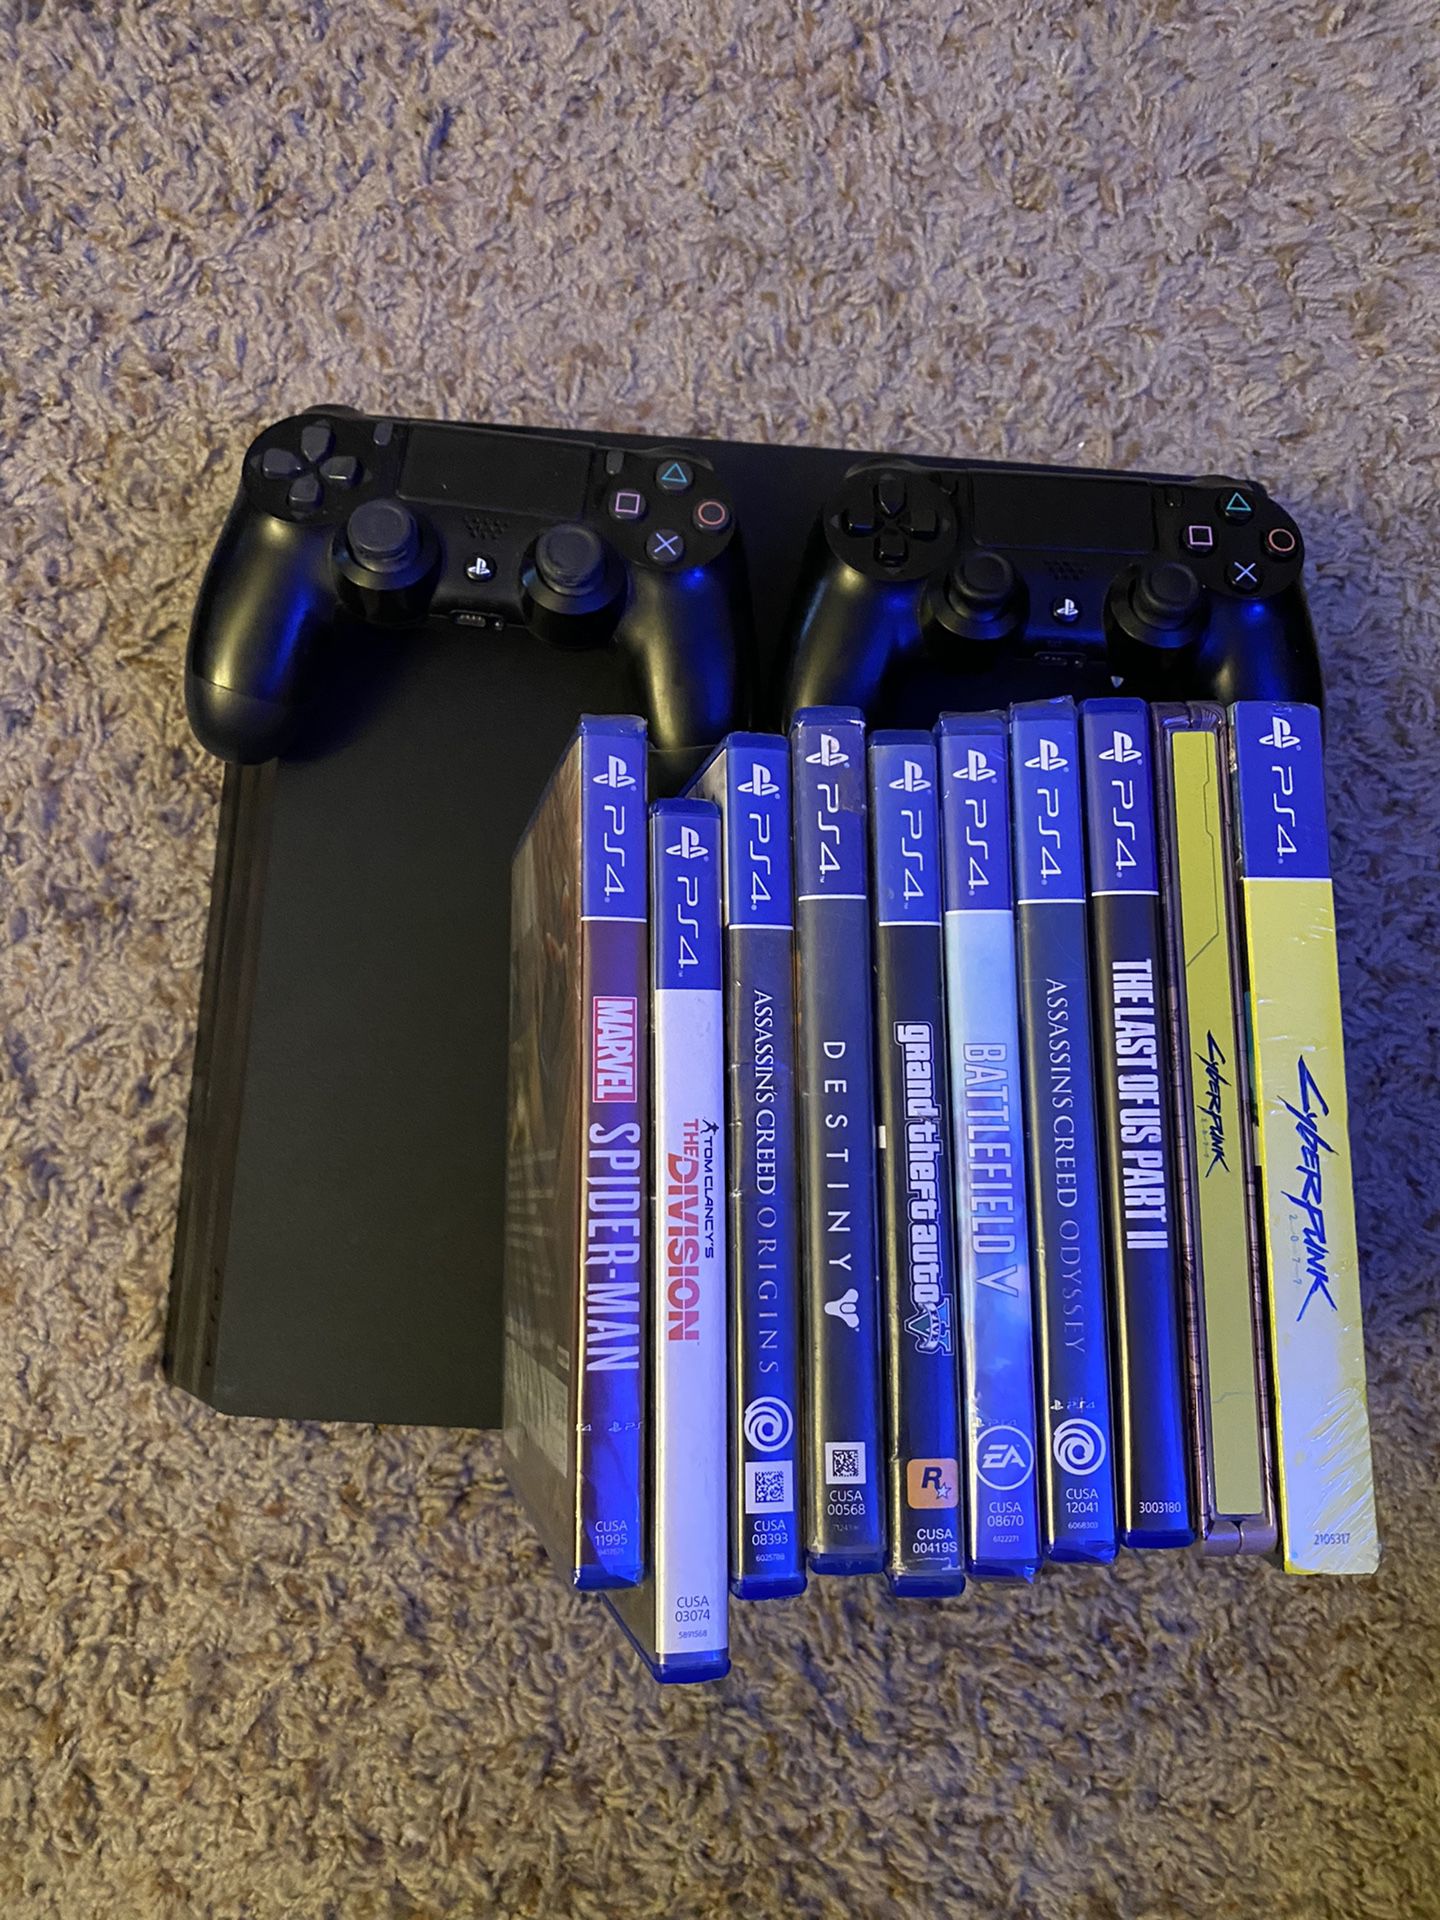 PS4 Pro w/ 500 GB SSD & 2 controllers